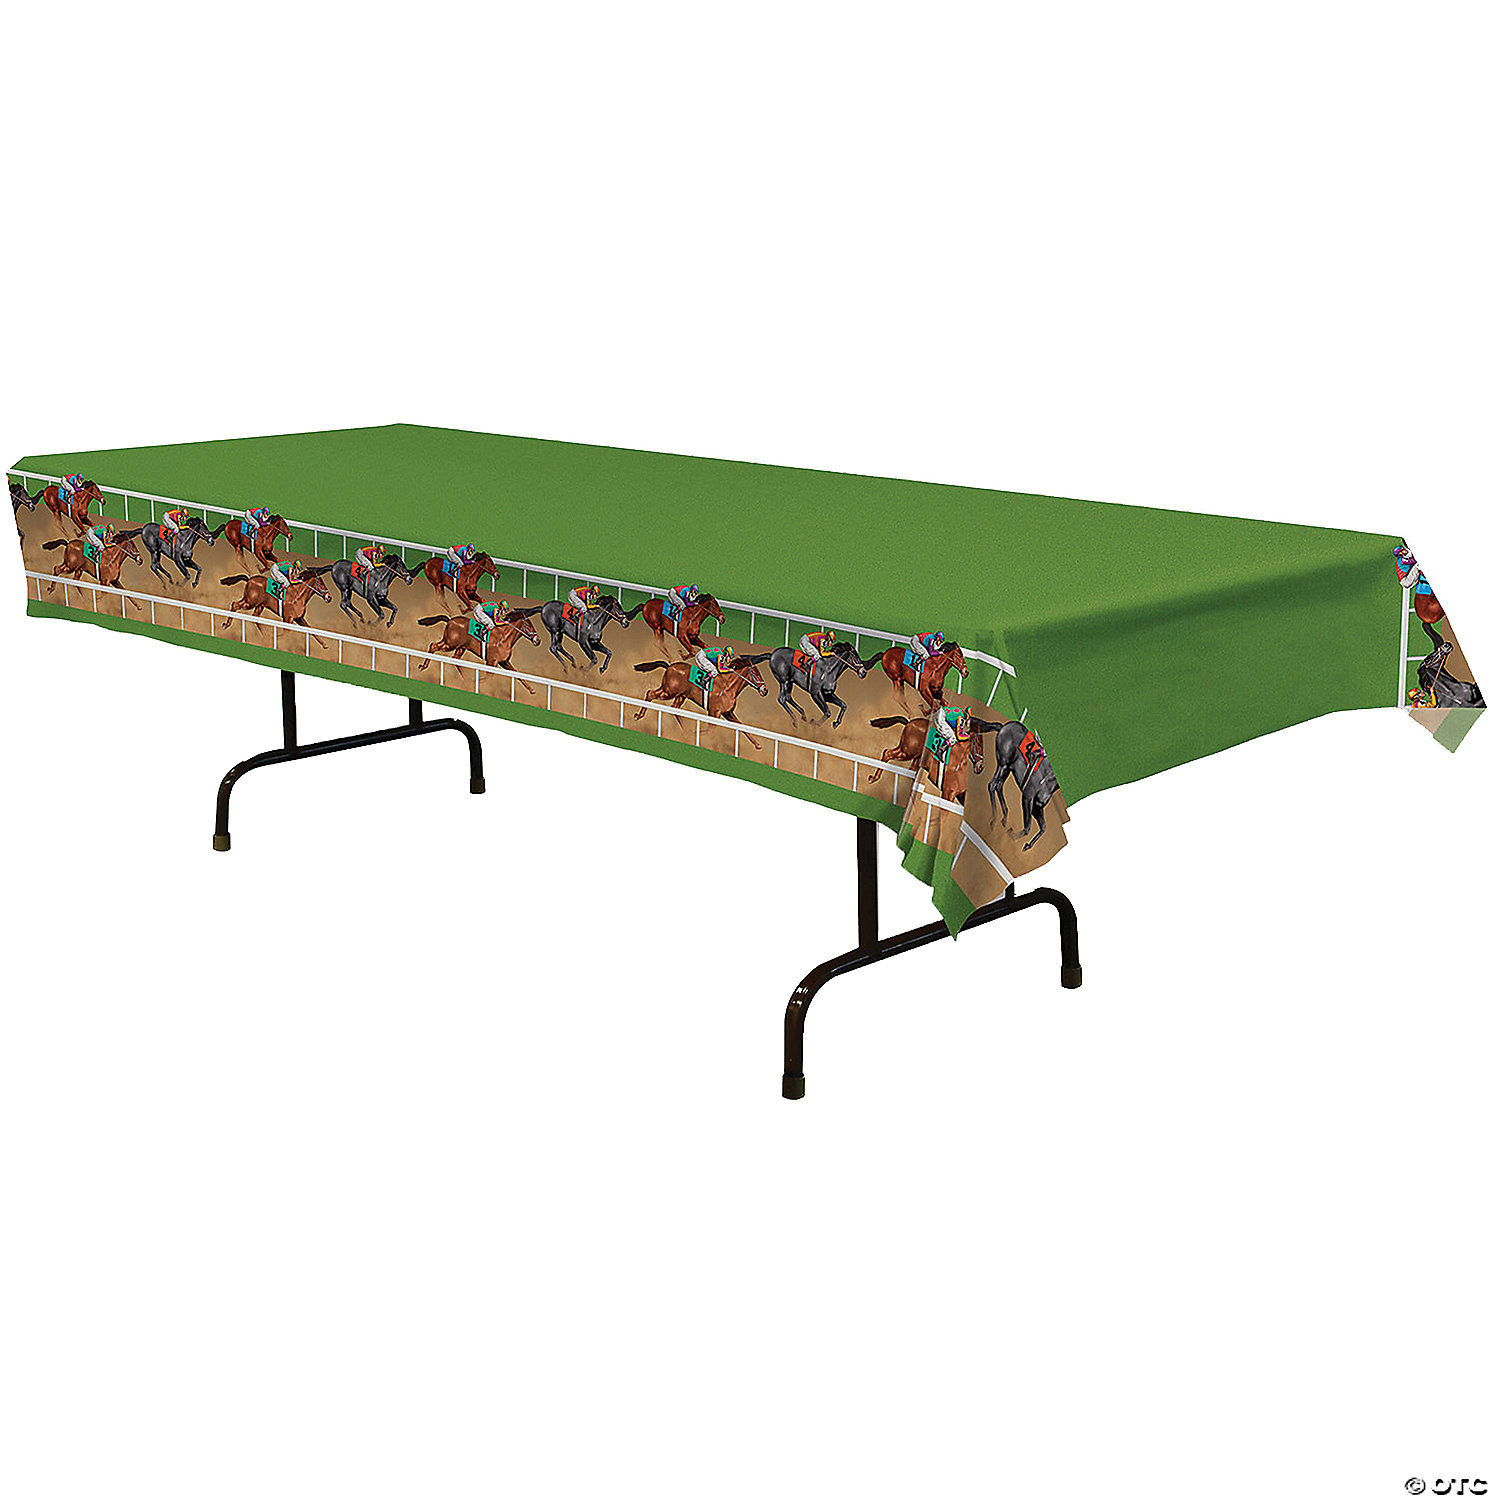 HORSE RACING TABLE COVER - HALLOWEEN